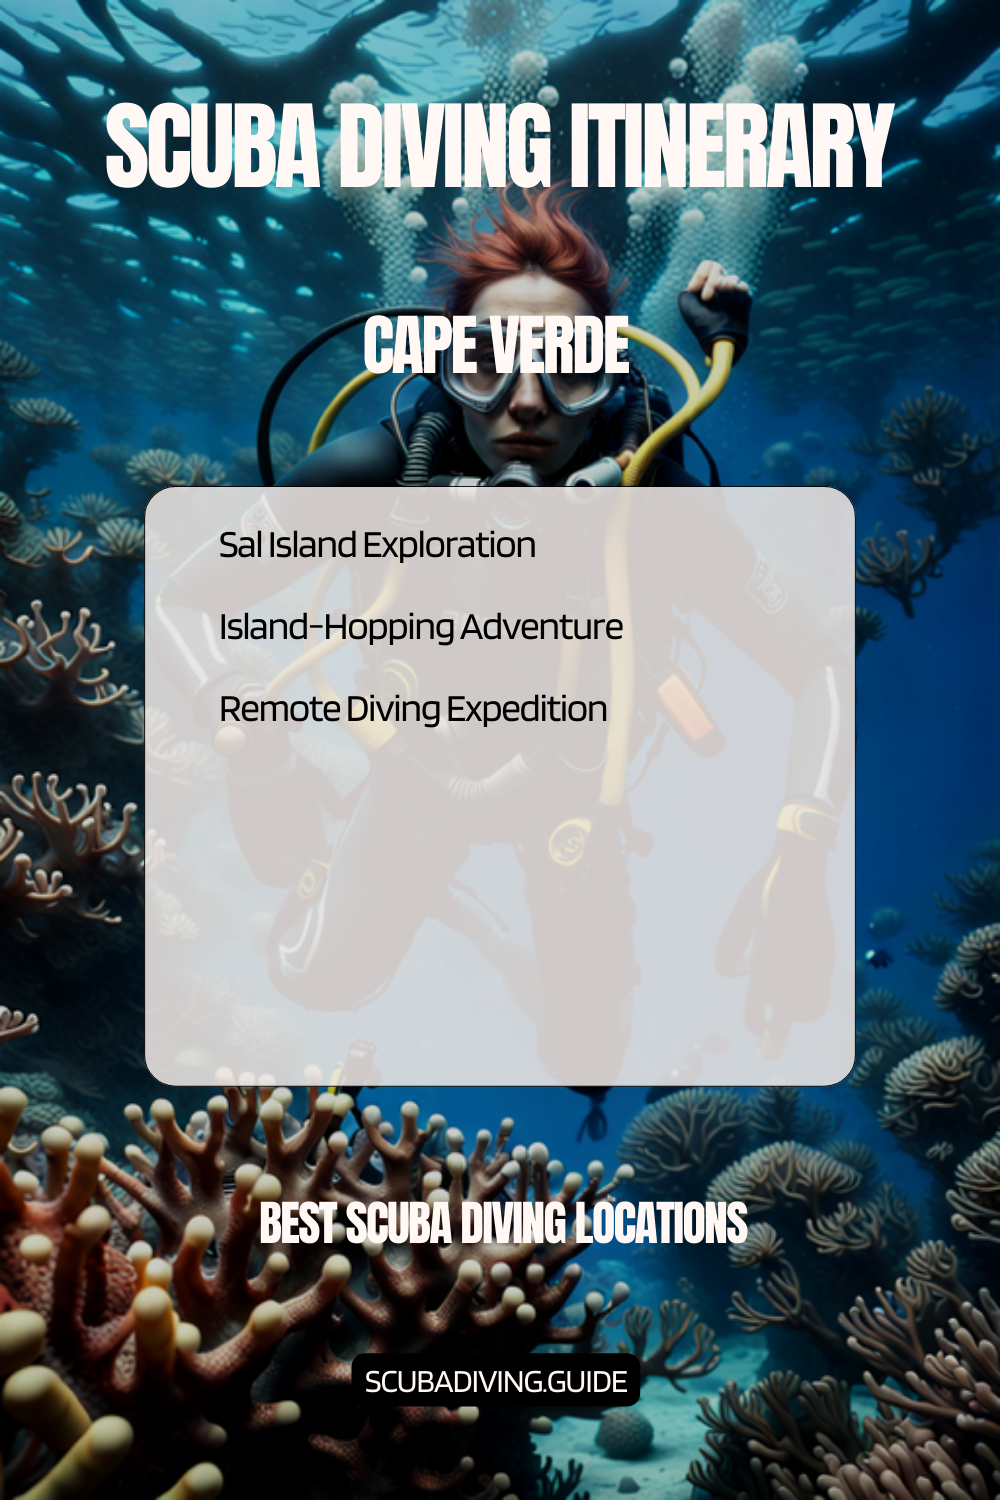 Cape Verde Recommended Scuba Diving Itineraries